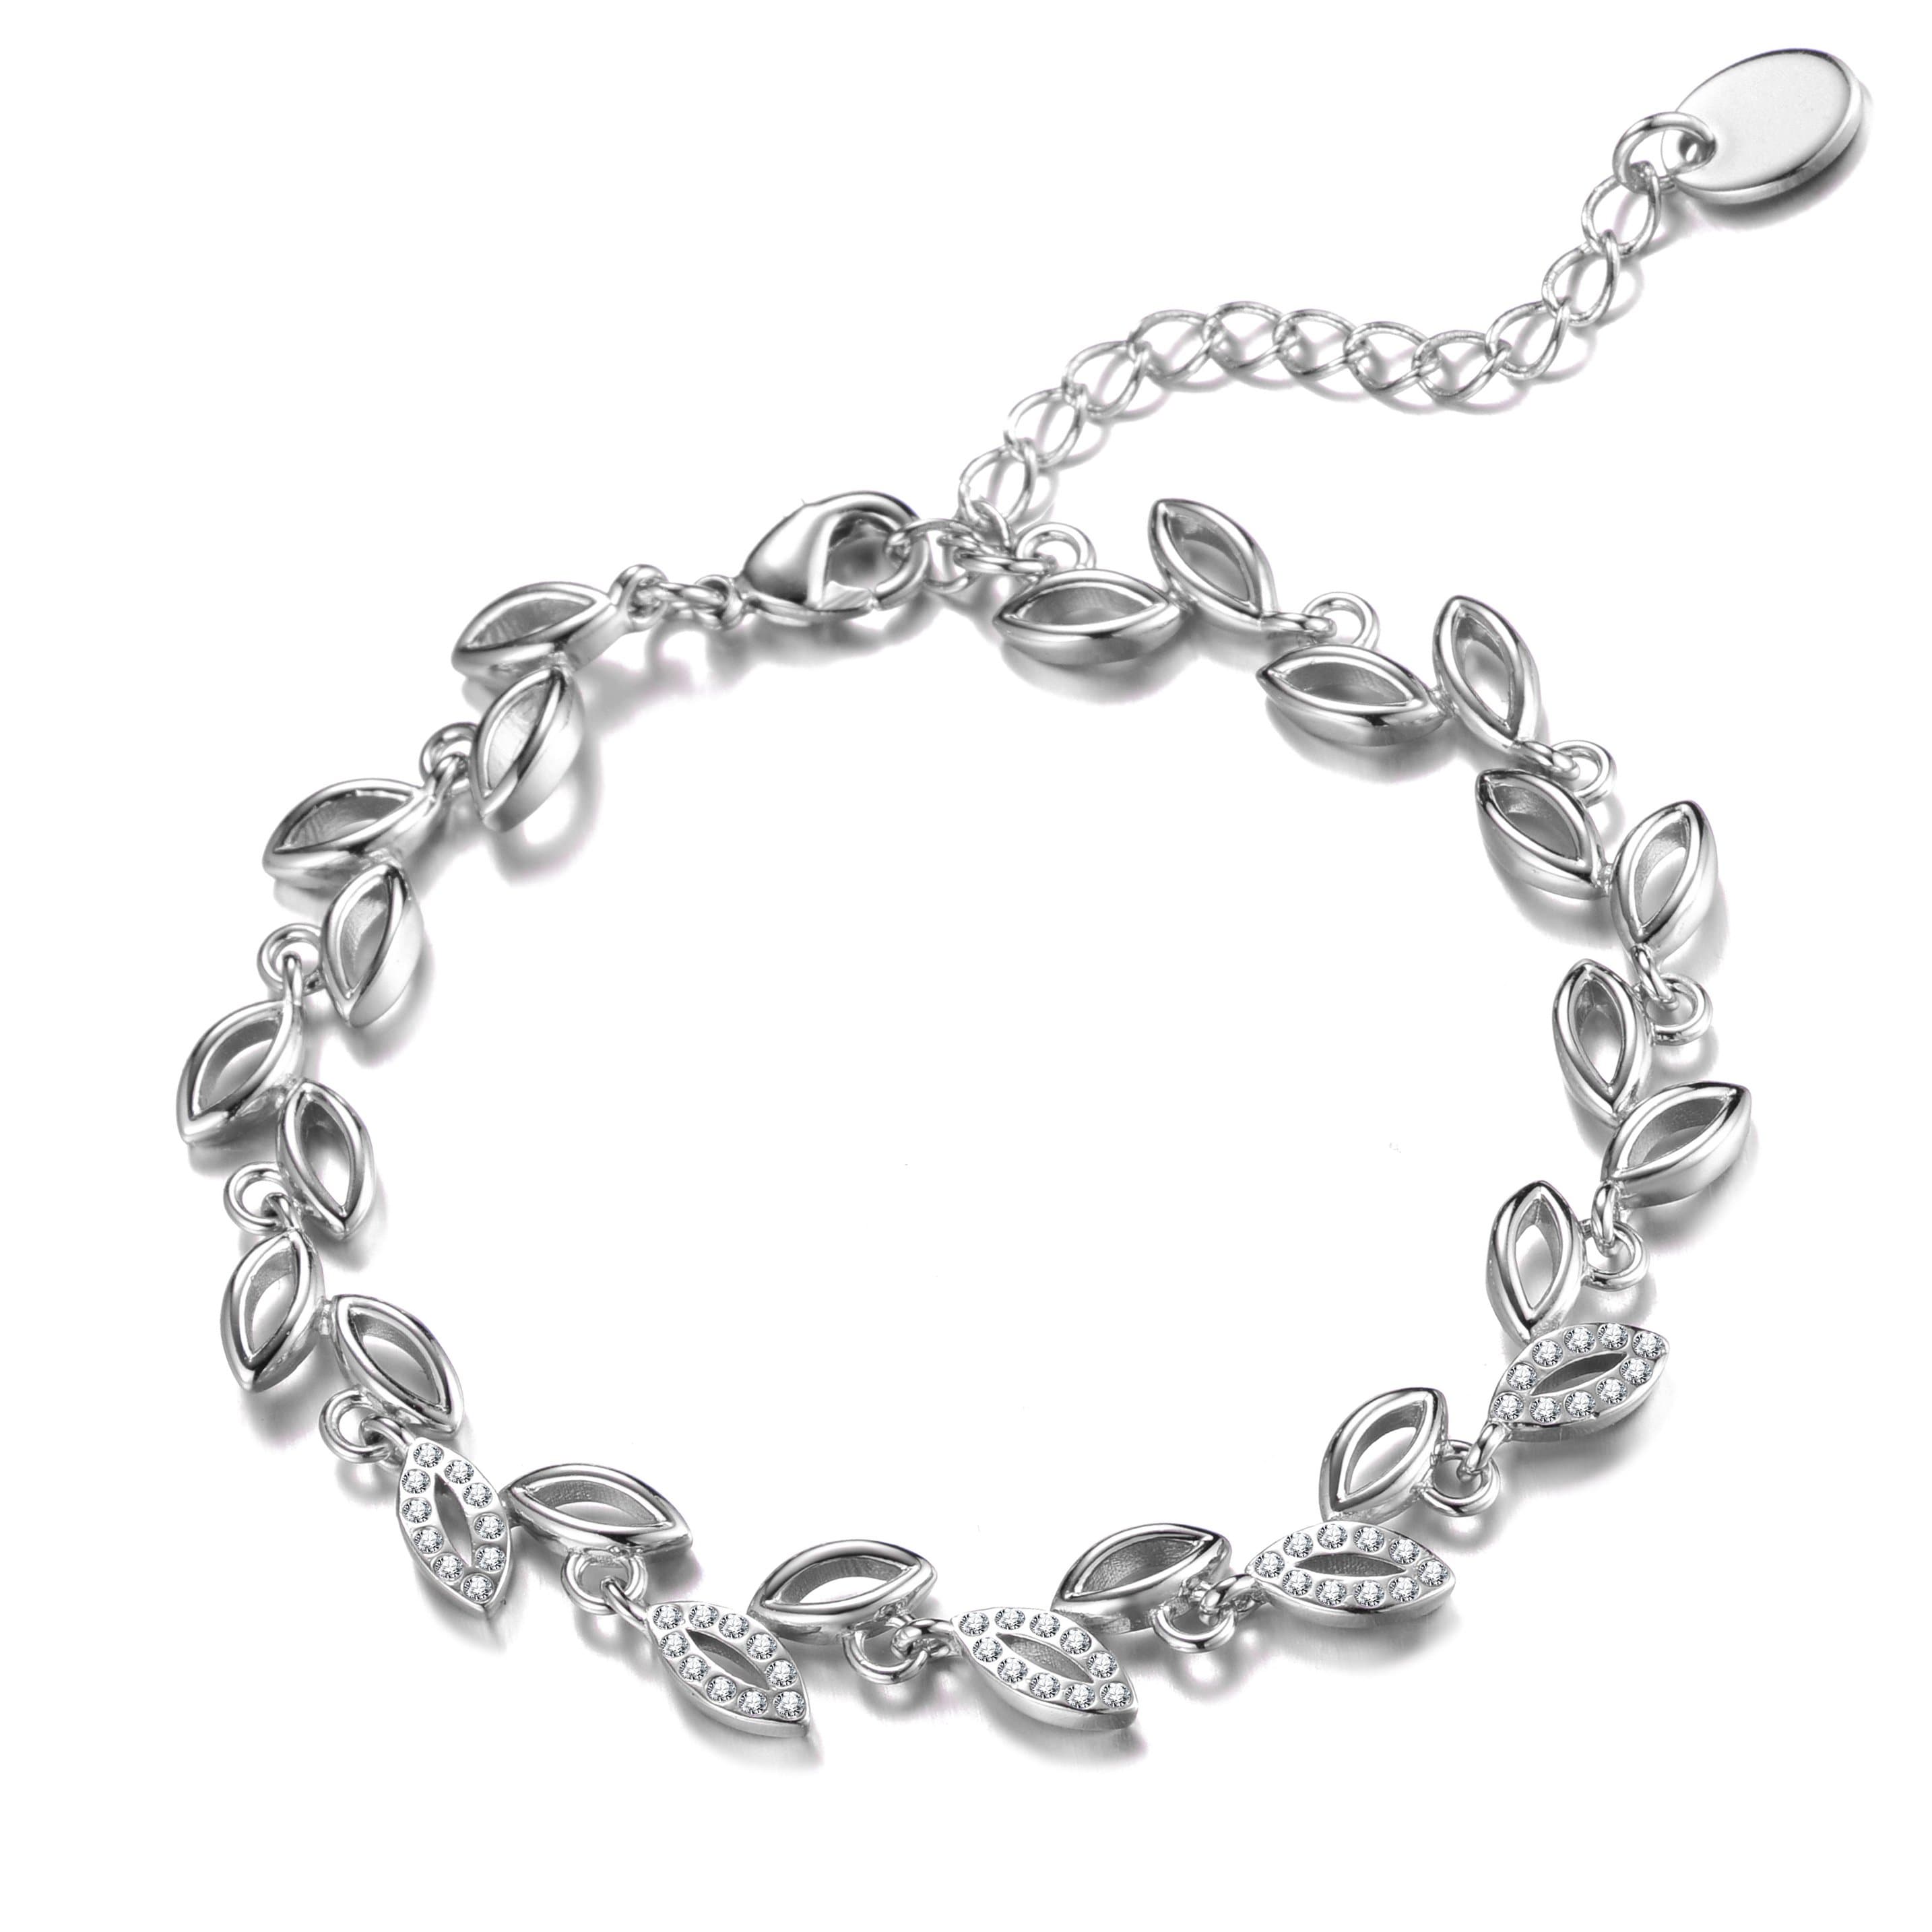 Silver Plated Leaf Bracelet Created With Crystals From Zircondia® by Philip Jones Jewellery